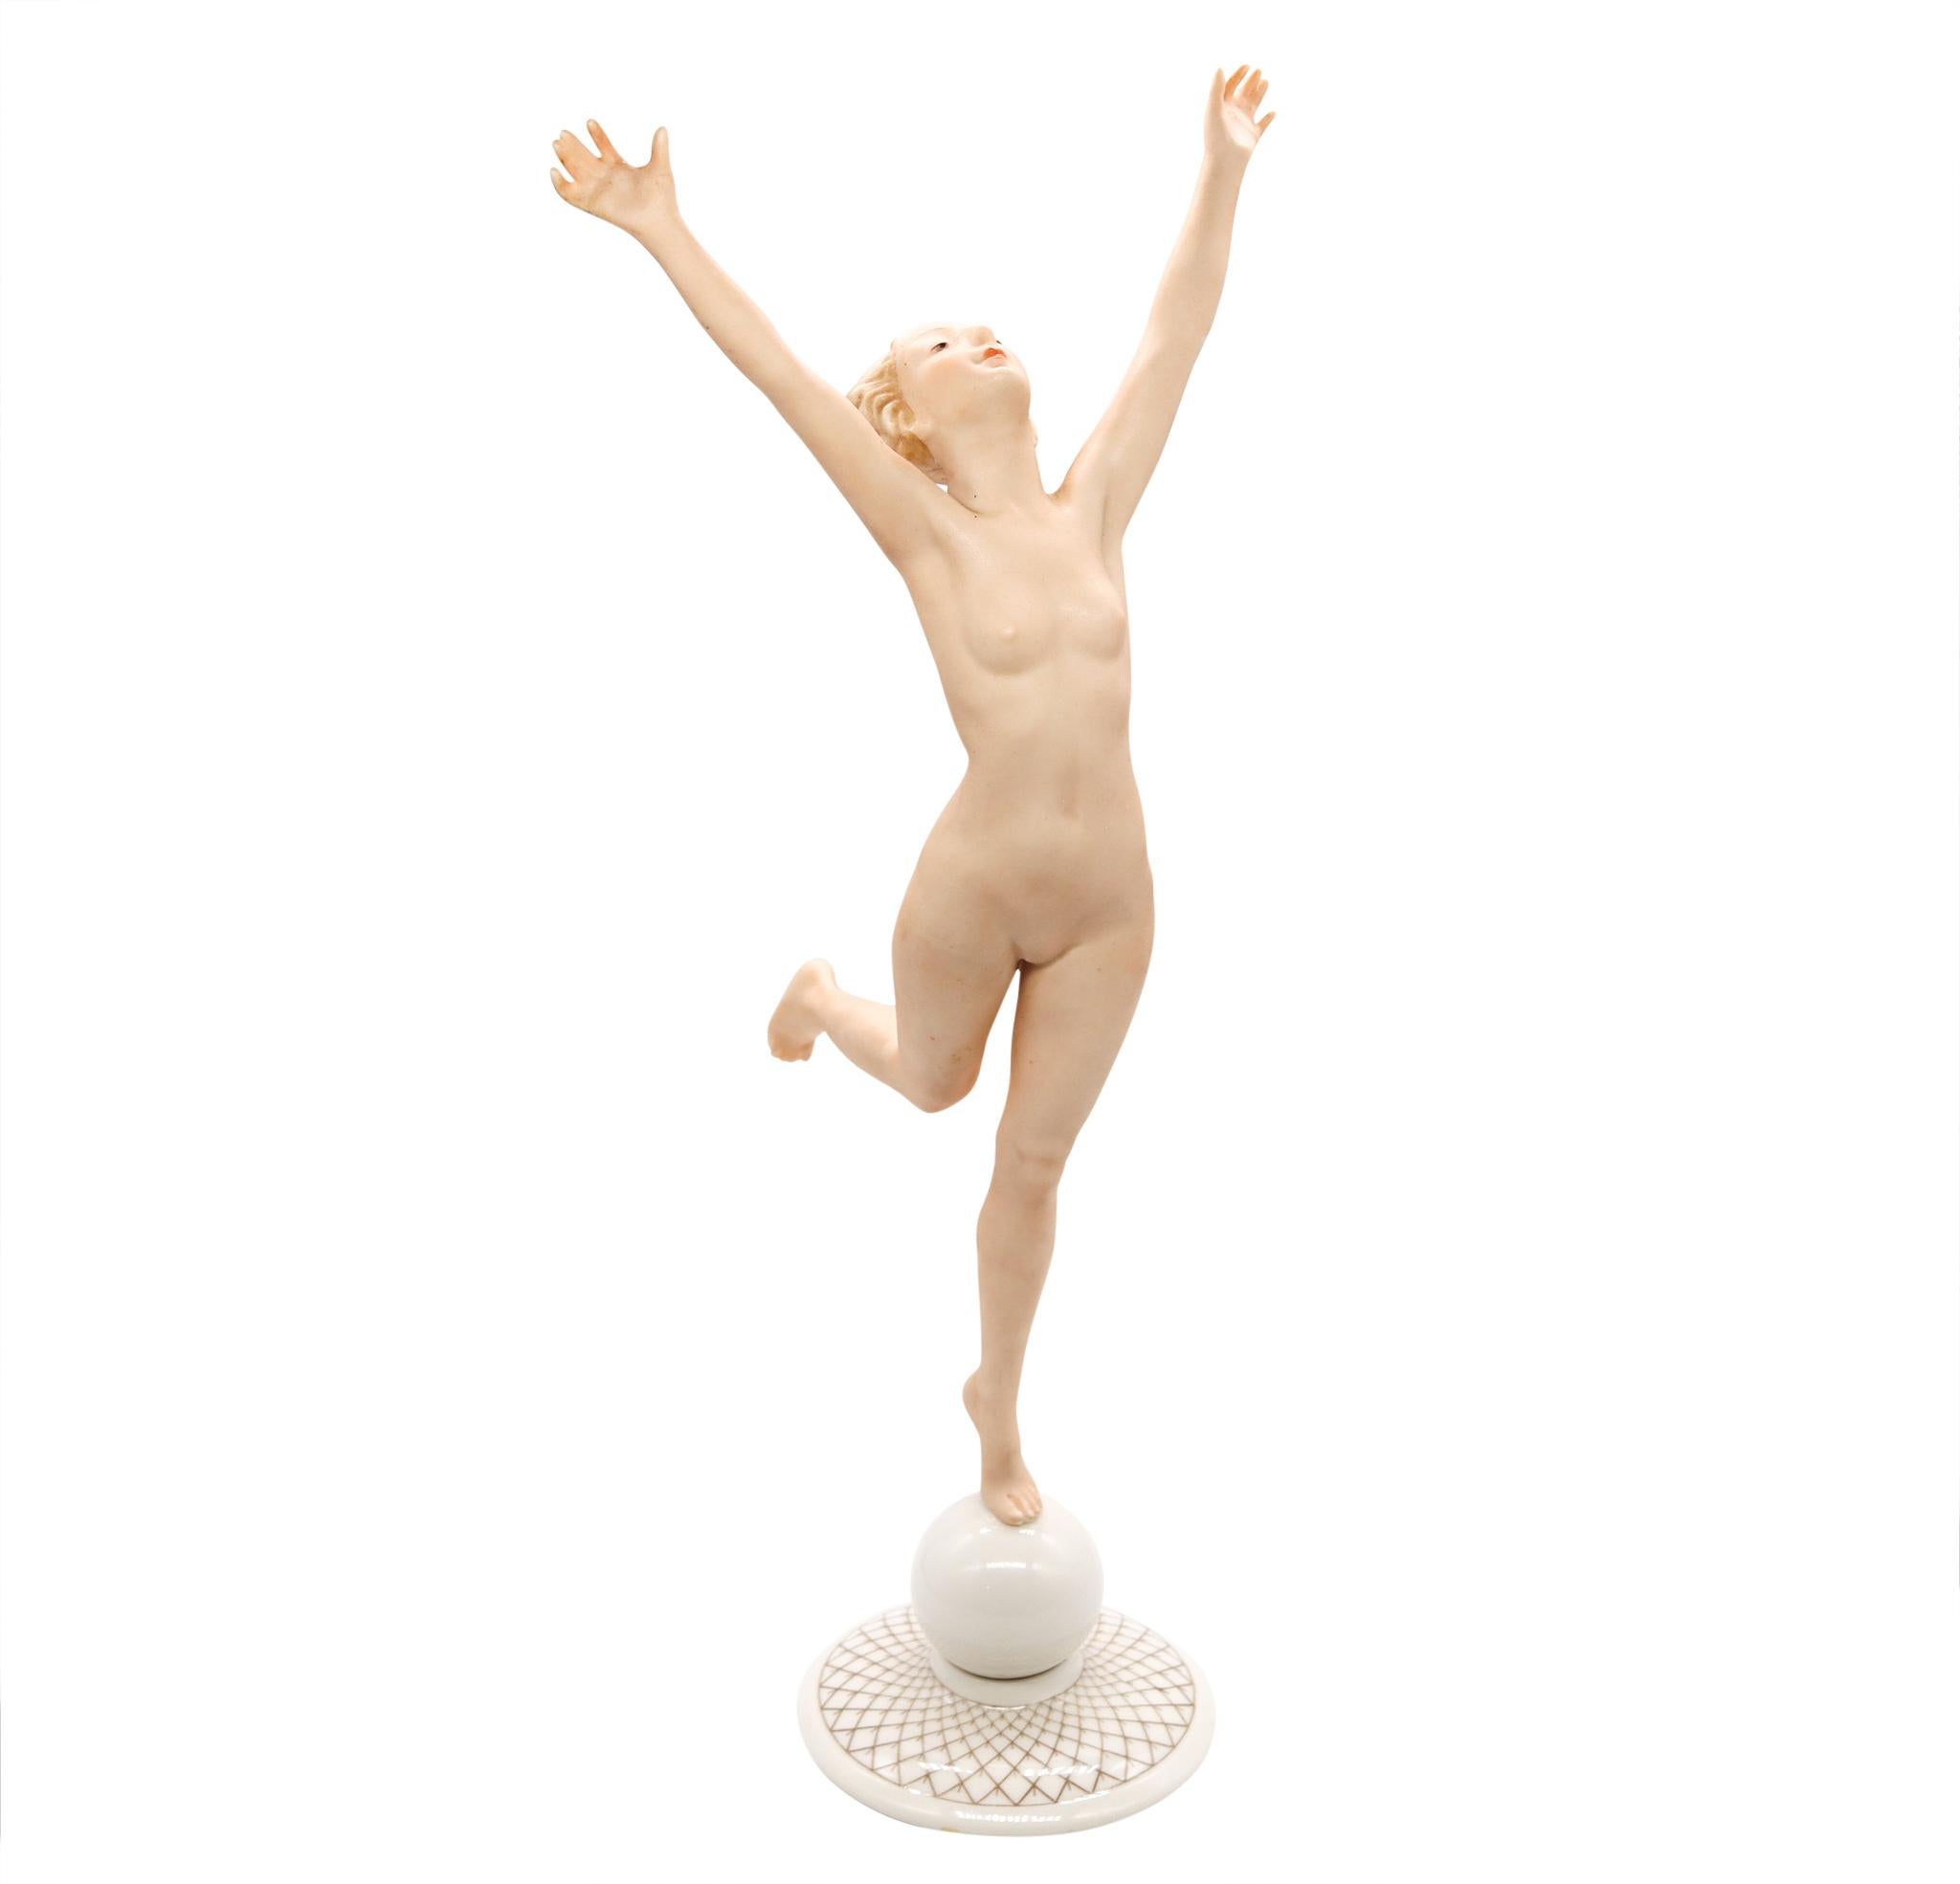 Art Deco 1930 porcelain figure by Karl Tutter (1883-1969) for Hutschenreuther.

This piece has been created in Bavaria, Germany back in the 1930. This was designed by the artist Karl Tutter-one of the premiere porcelain modelers of his day!-and